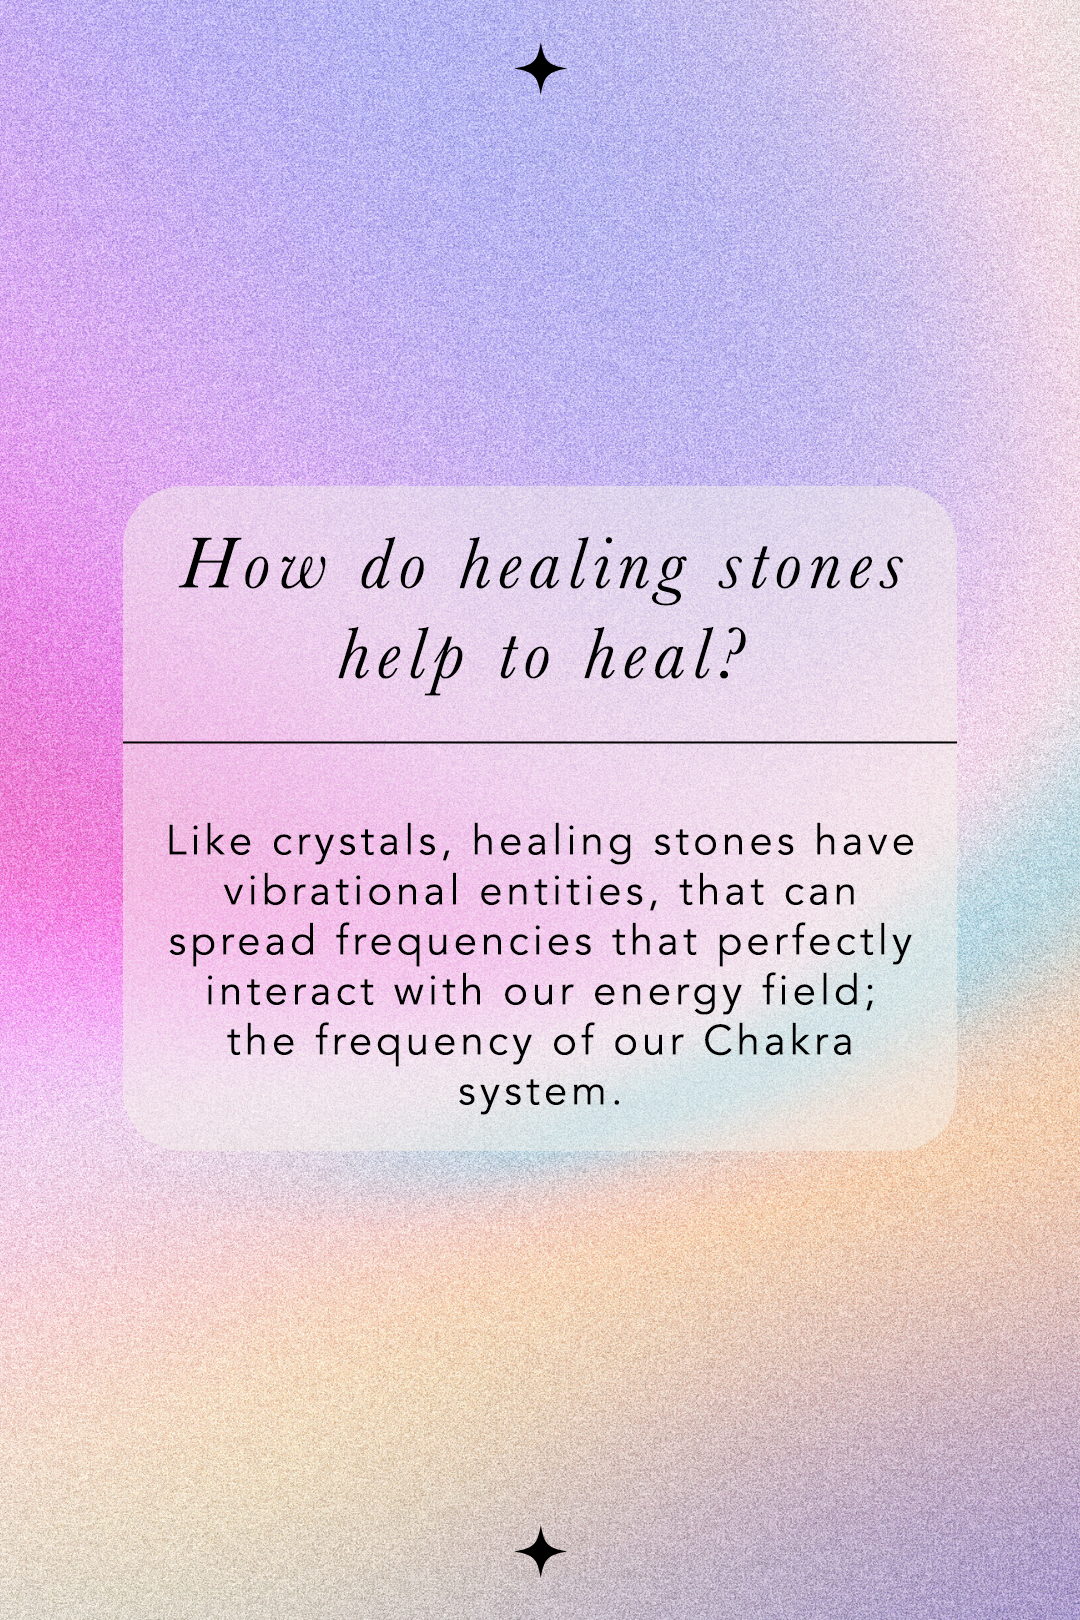 How do healing stones help to heal? Like crystals, healing stones have vibrational entities, that can spread frequencies that perfectly interact with our energy field; the frequency of our Chakra system.